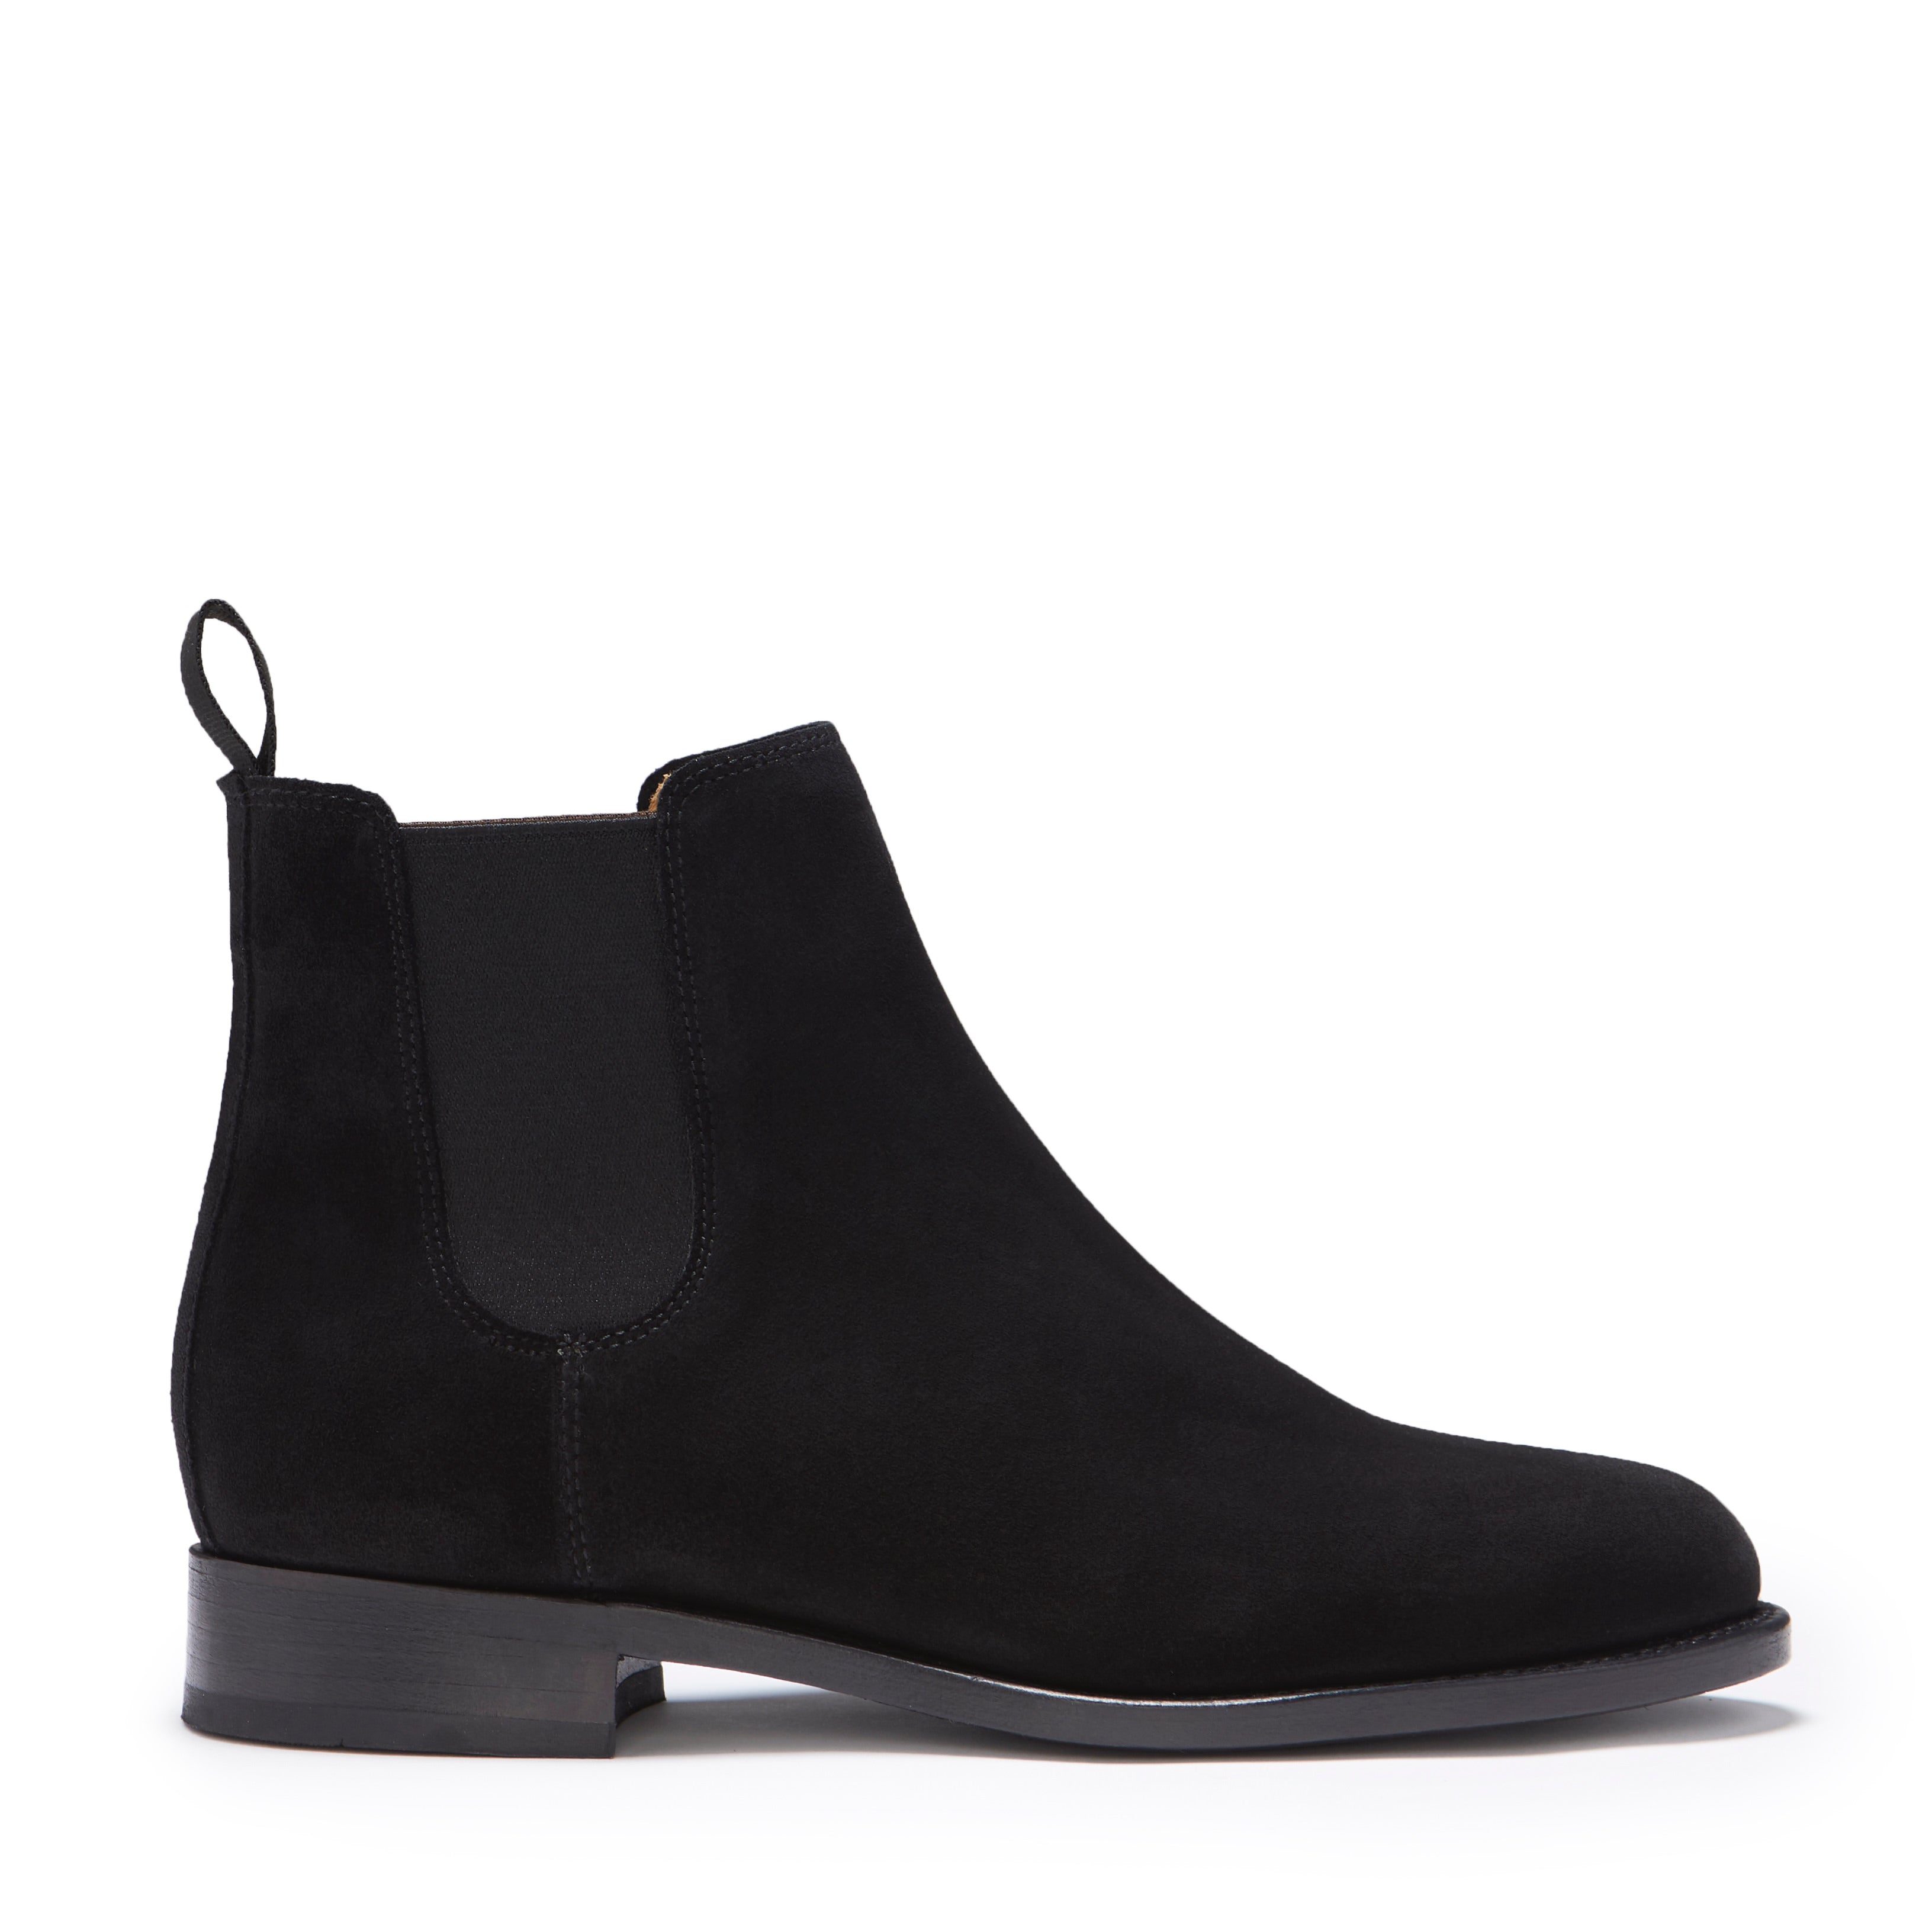 black suede chelsea boots womens uk